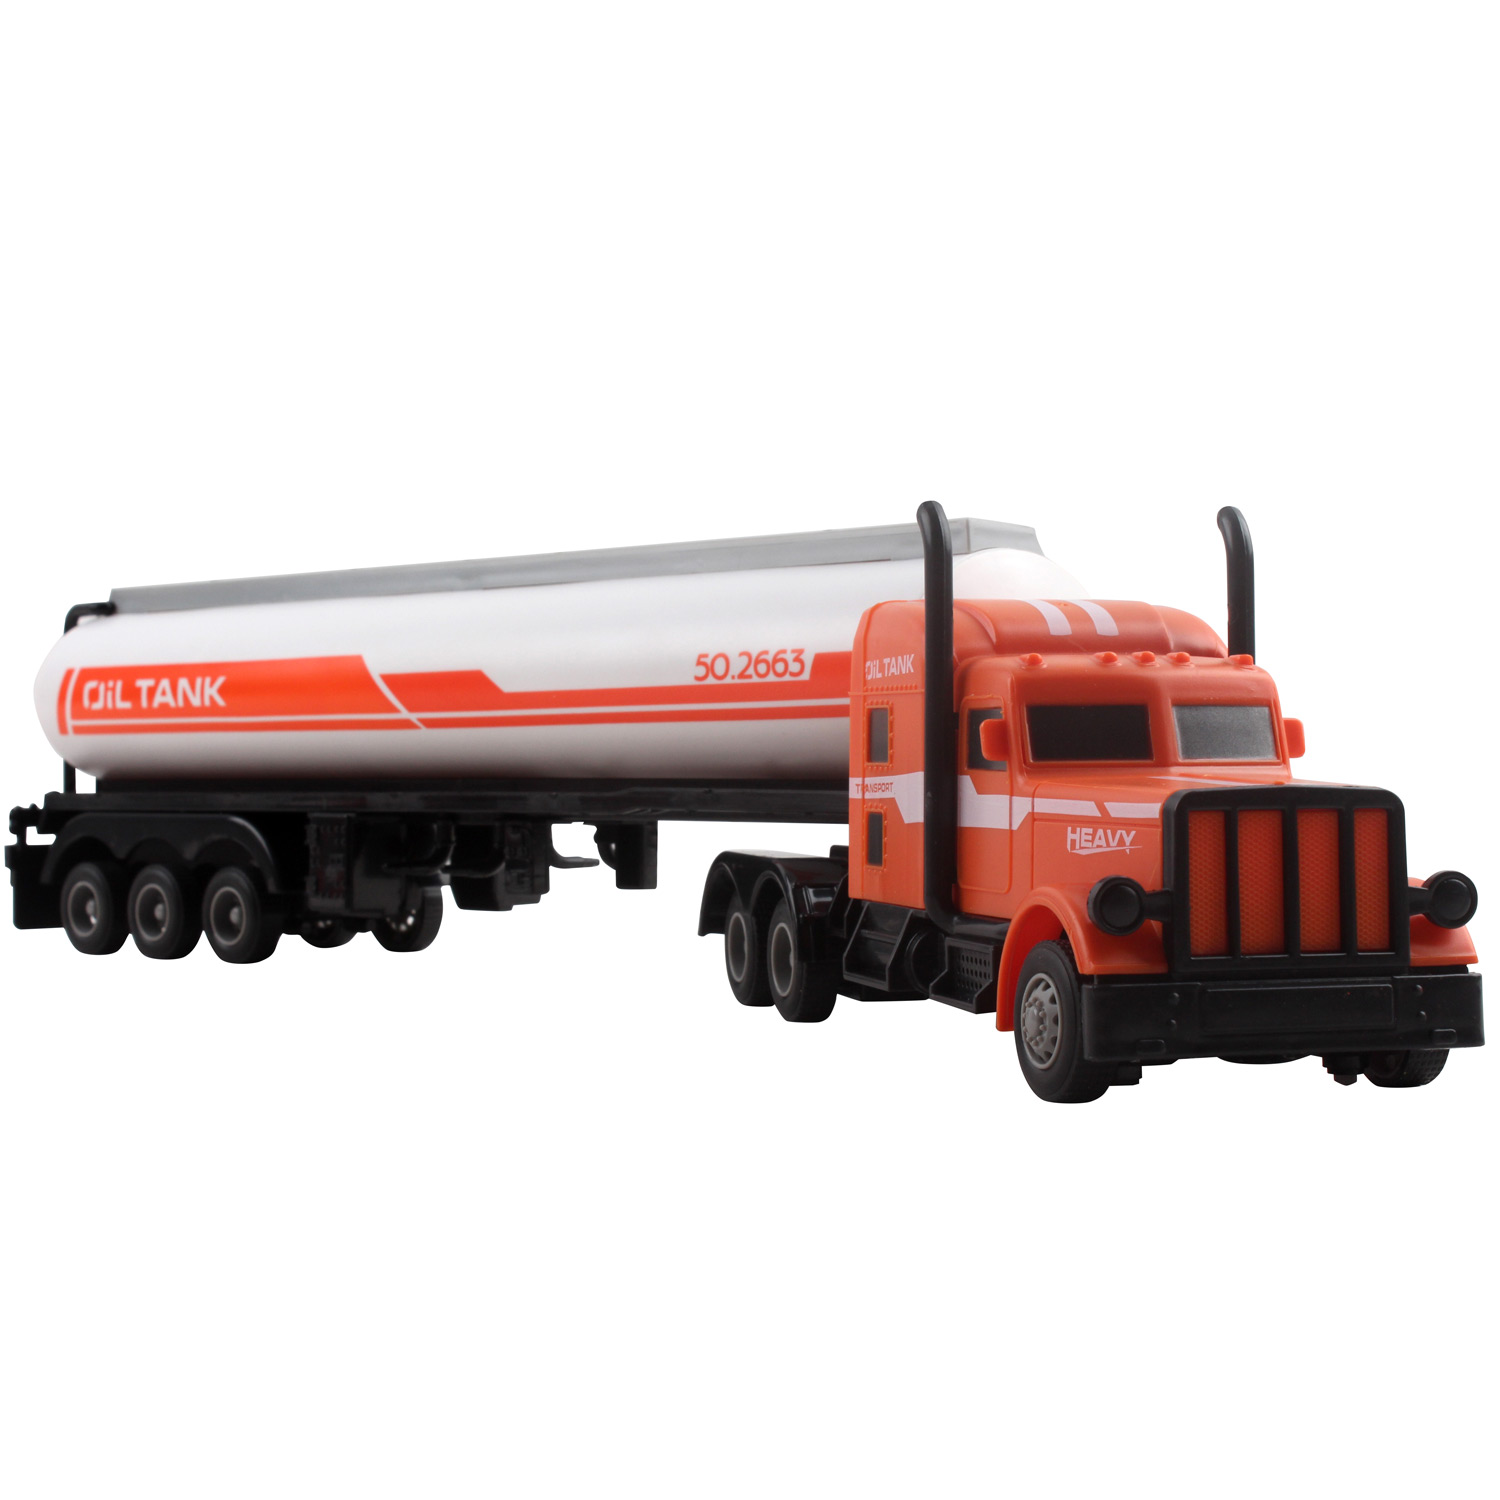 Large RC Toy Semi Truck Fuel Trailer 2.4Ghz Fast Speed 1:20 Scale Electric Oil Hauler Rechargeable Remote Control Kids Big Rig Carrier Transporter Vehicle Full Cargo Perfect Childrenâ€™s Toy Gift